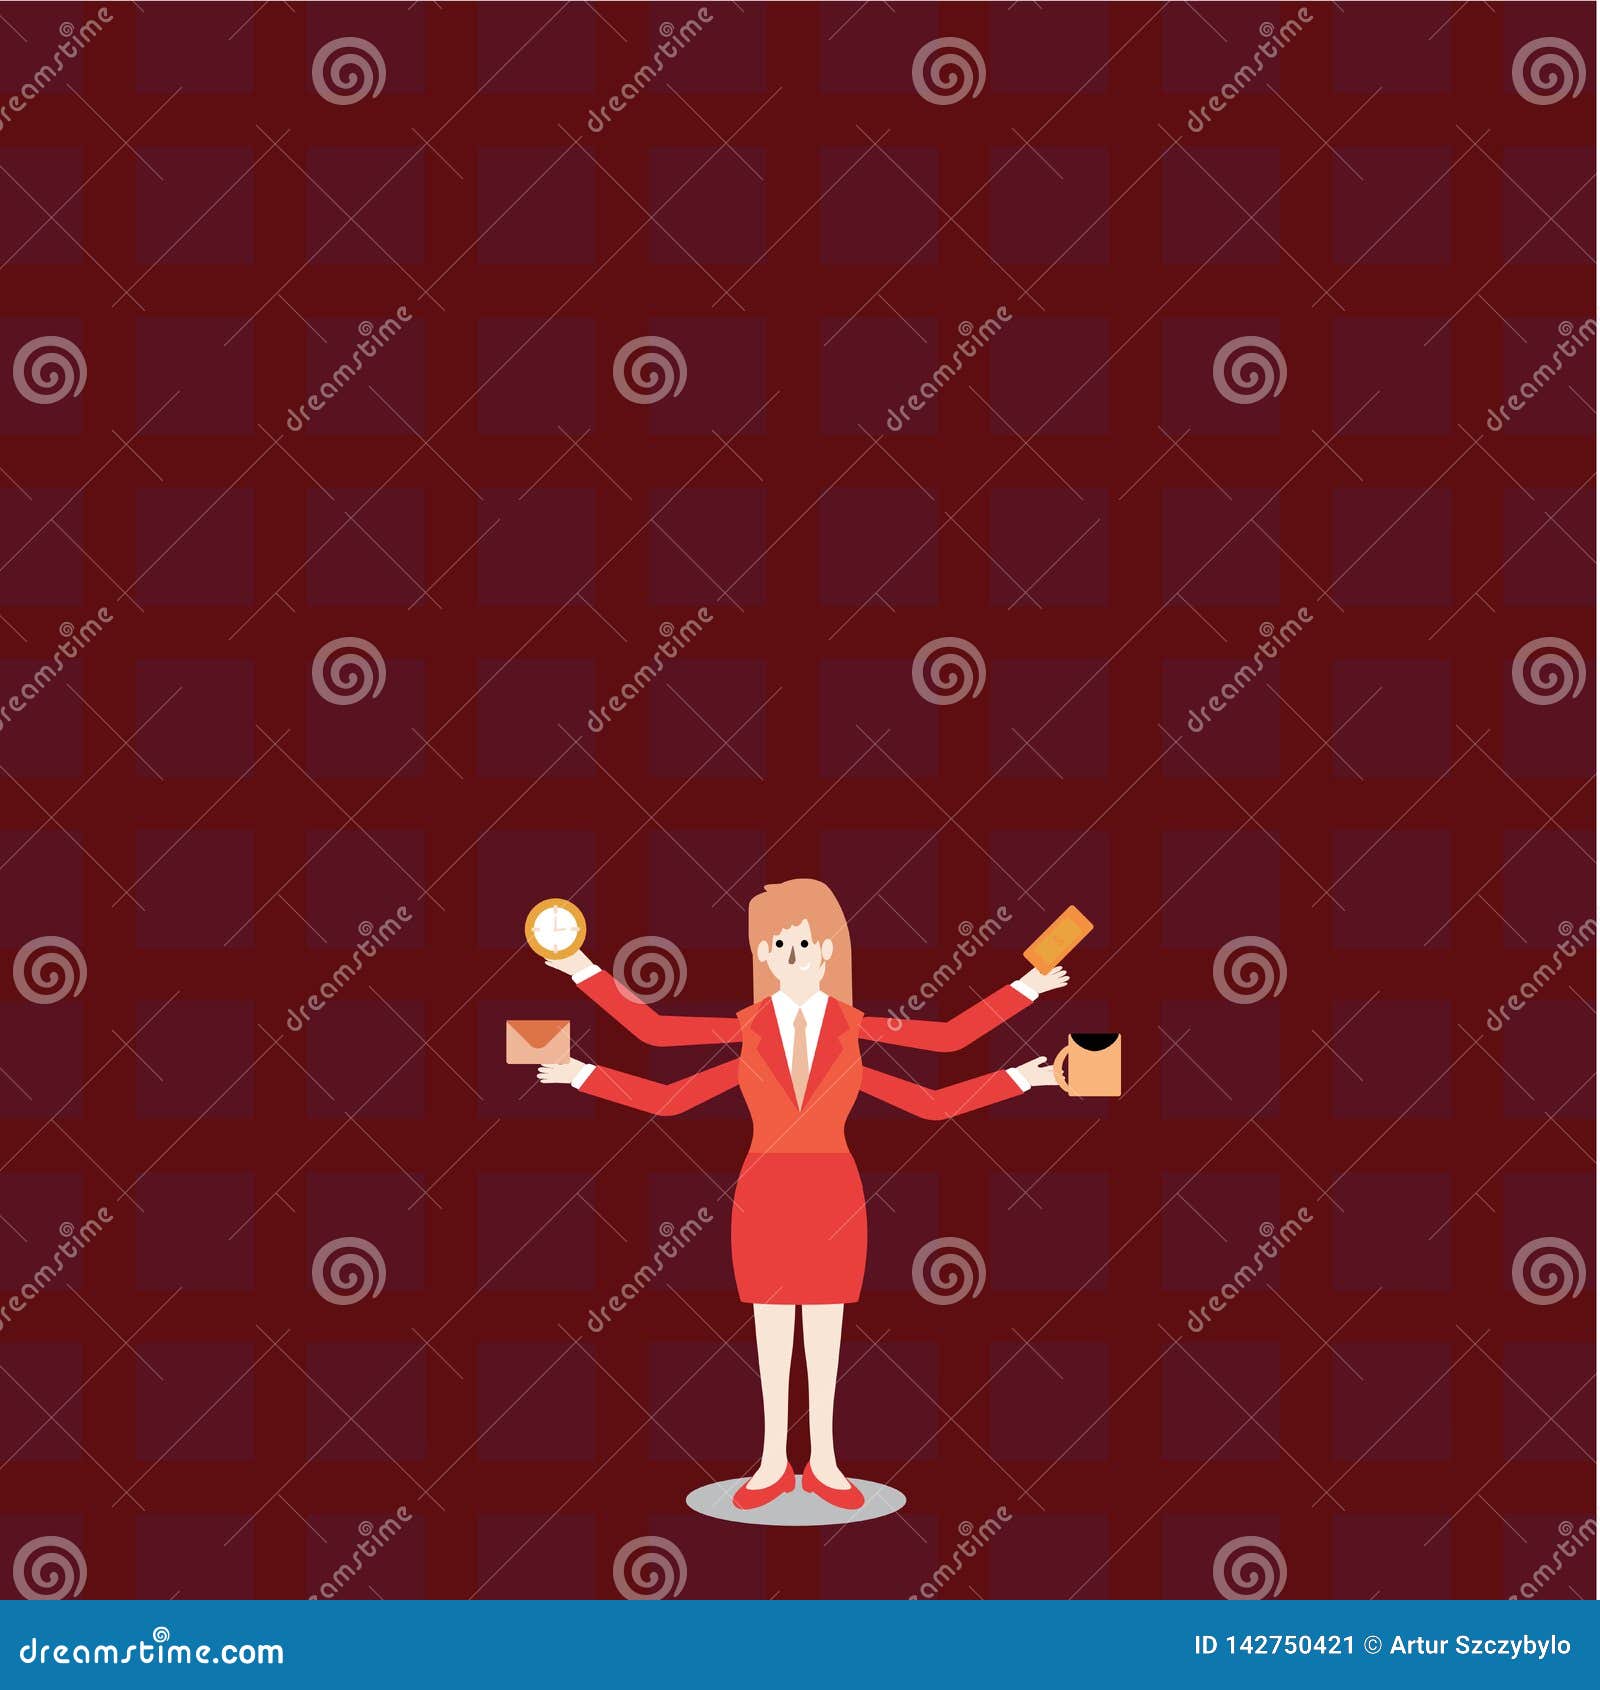 Woman in Business Suit Standing with Four Arms Exending Sideways